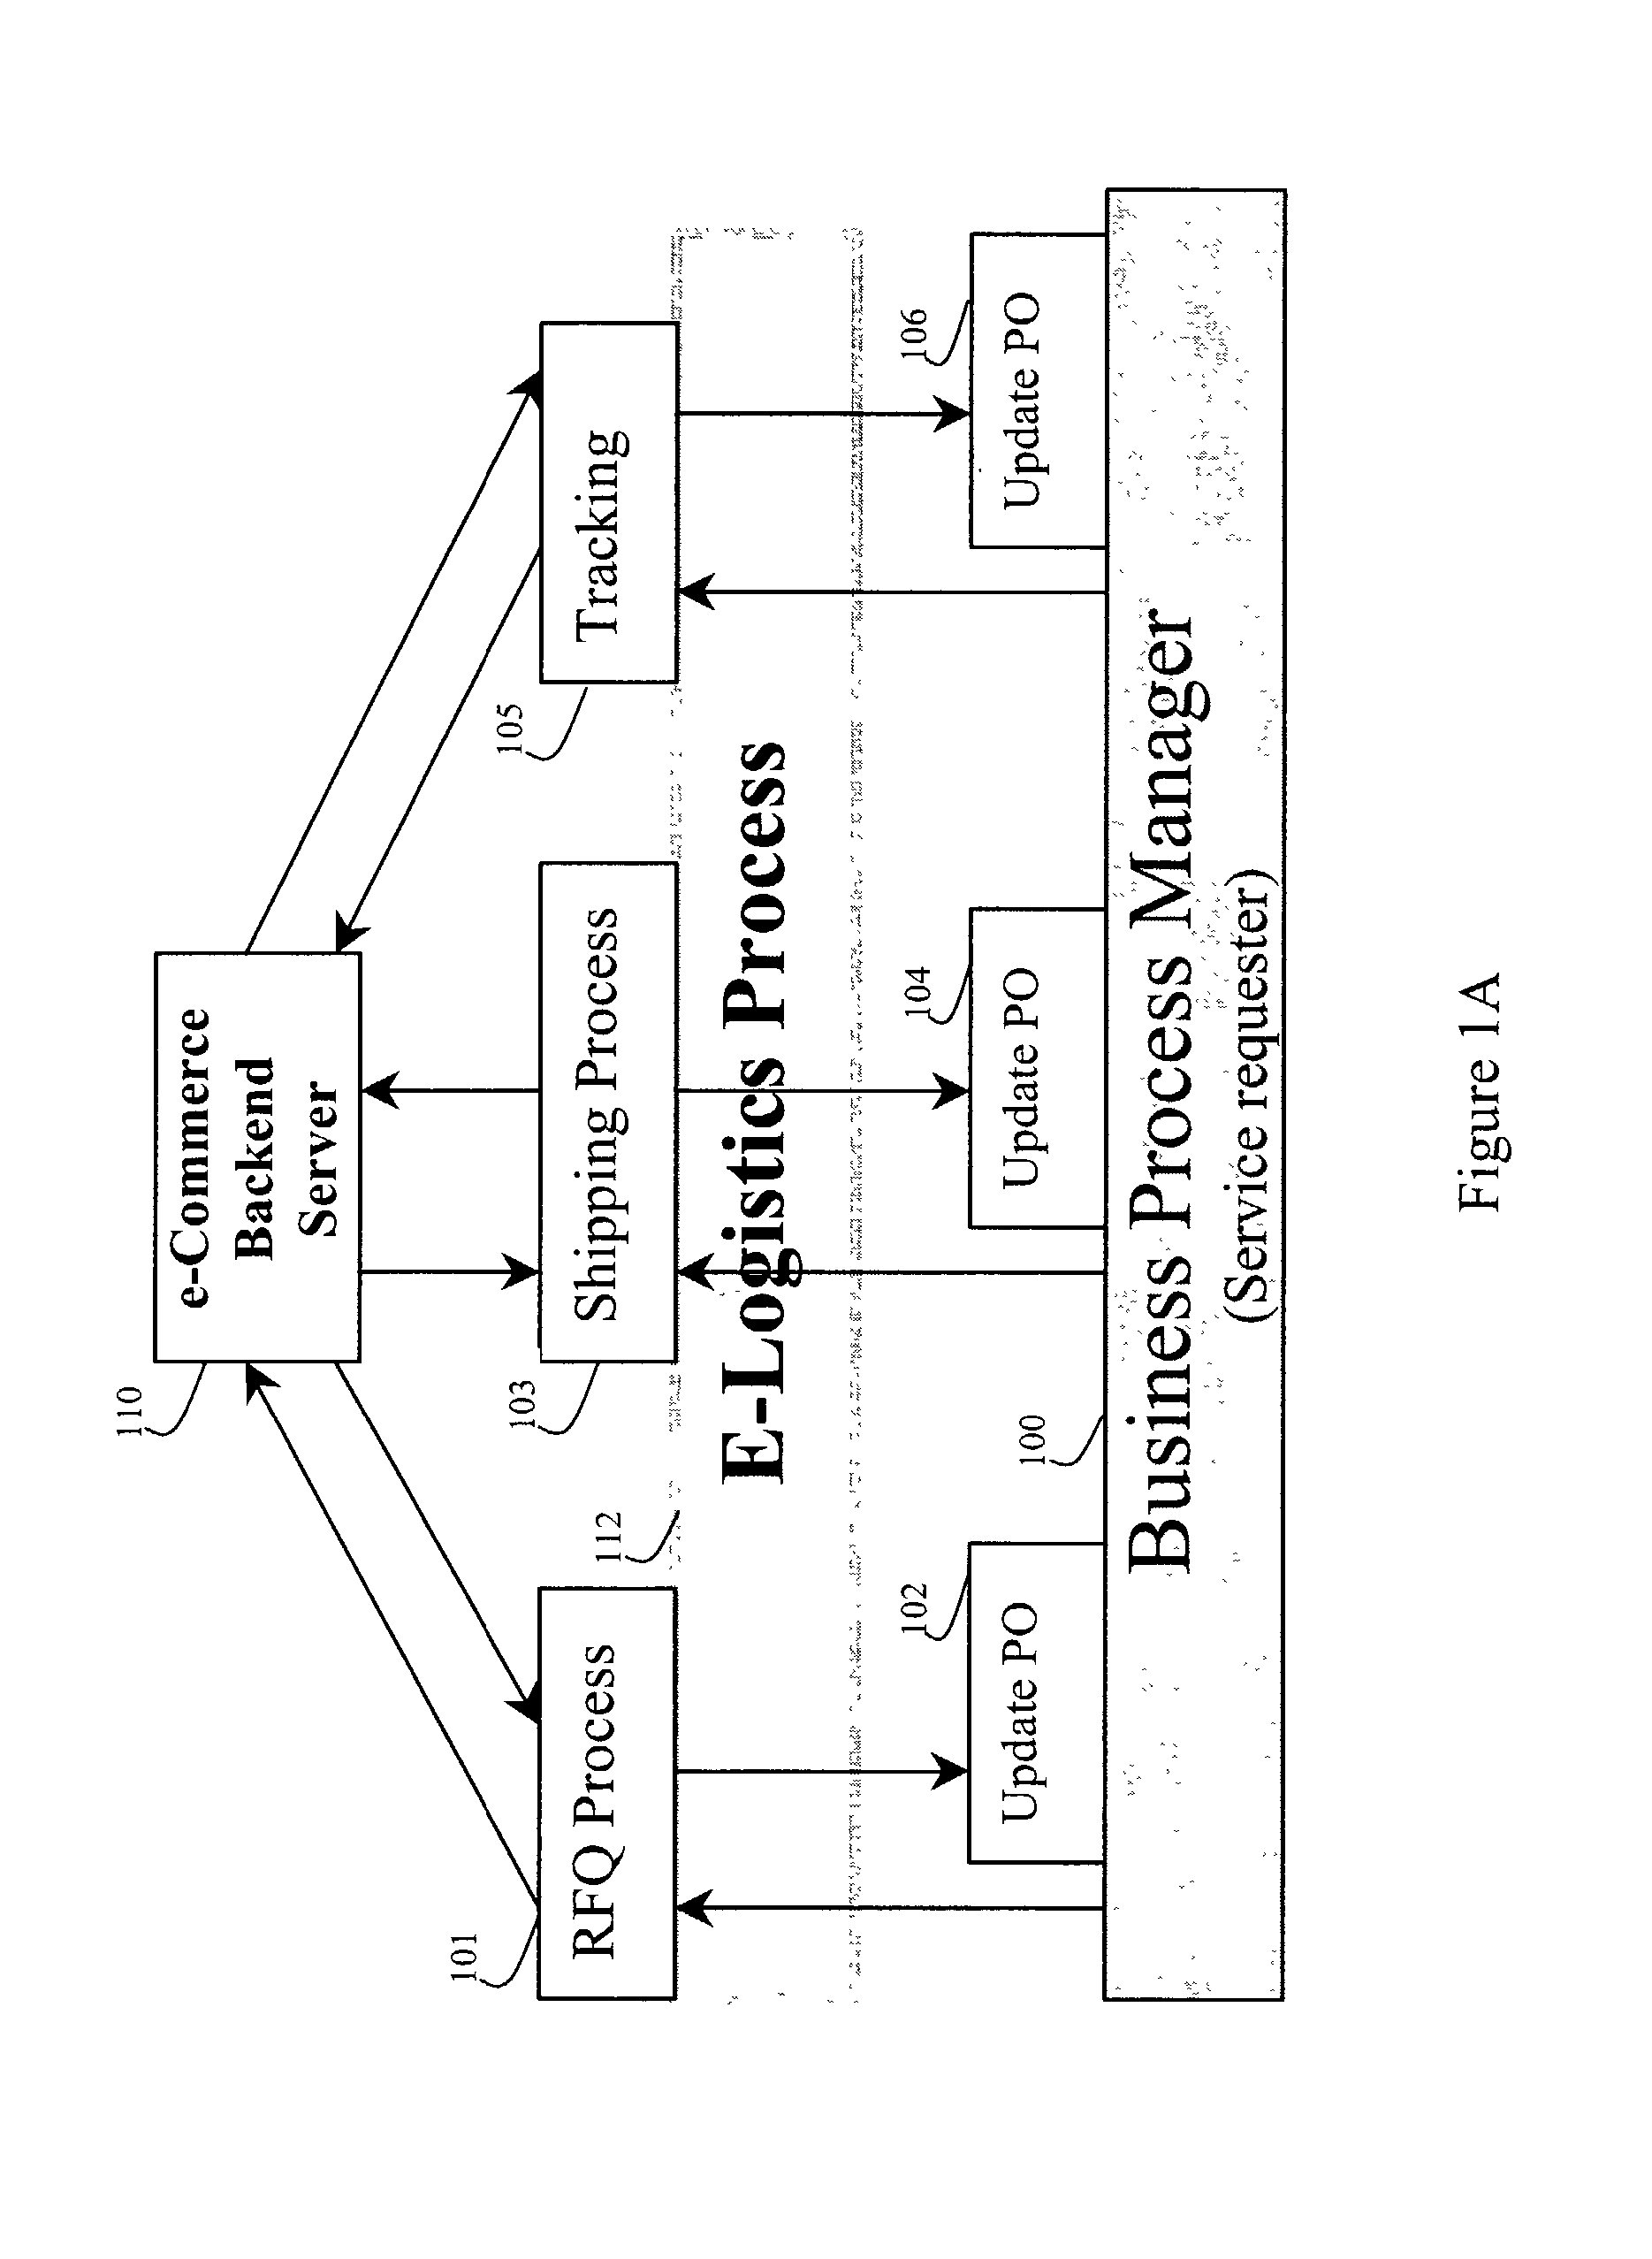 Method and system for integrating e-Logistics processes into a user/provider interface using Web Services